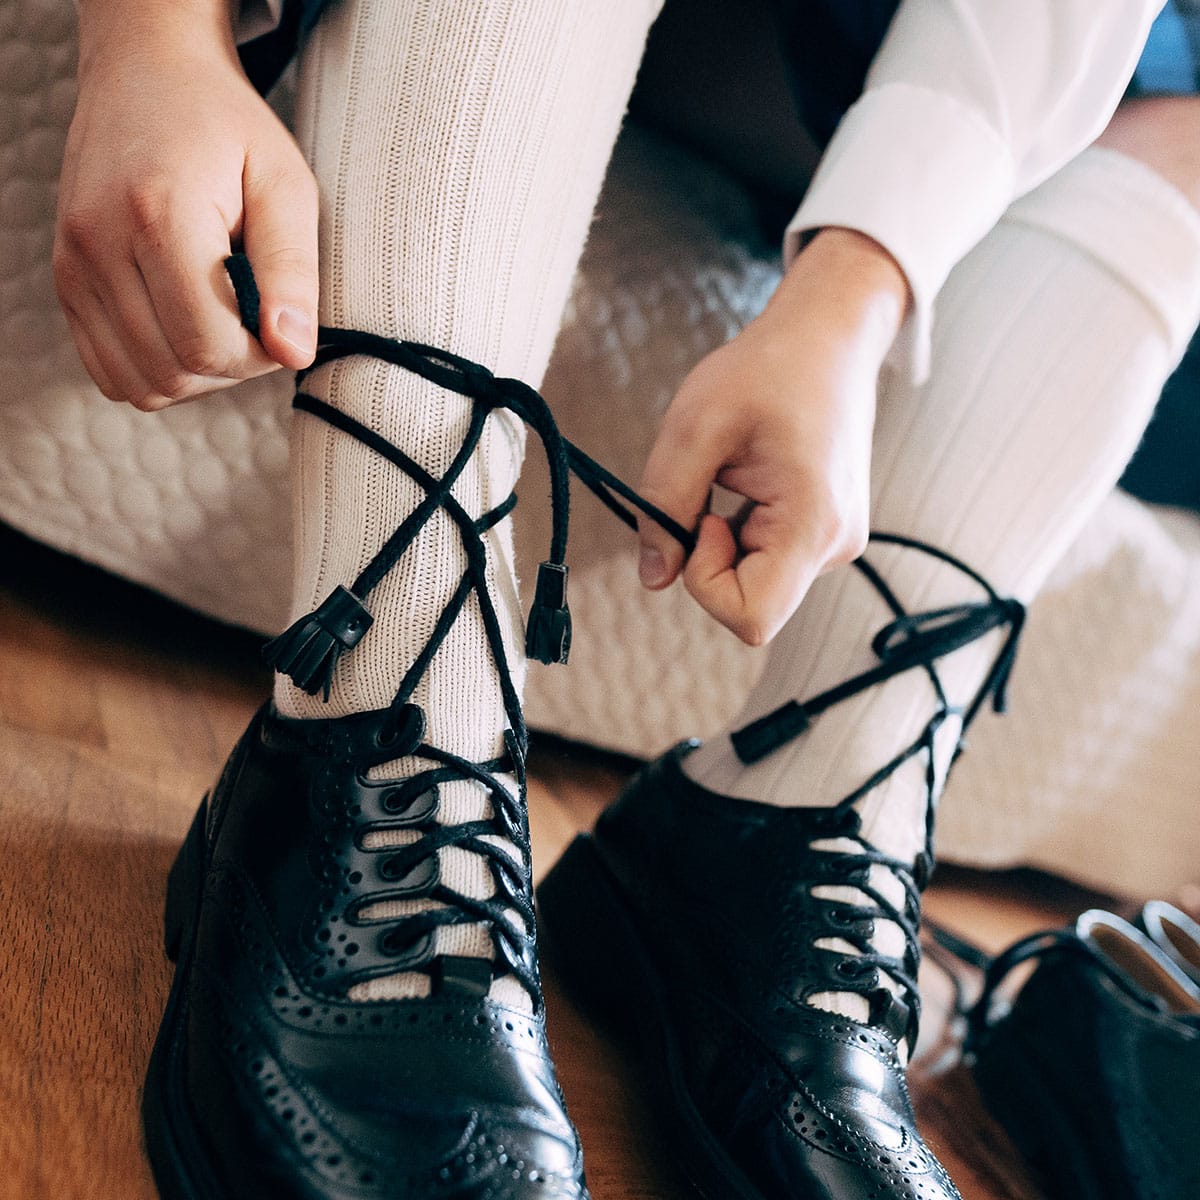 A person ties the Premium Ghillie Laces of black dress shoes while wearing white knee-high socks. The setting appears to be indoors on a wooden floor, adding a touch of premium elegance to the scene.